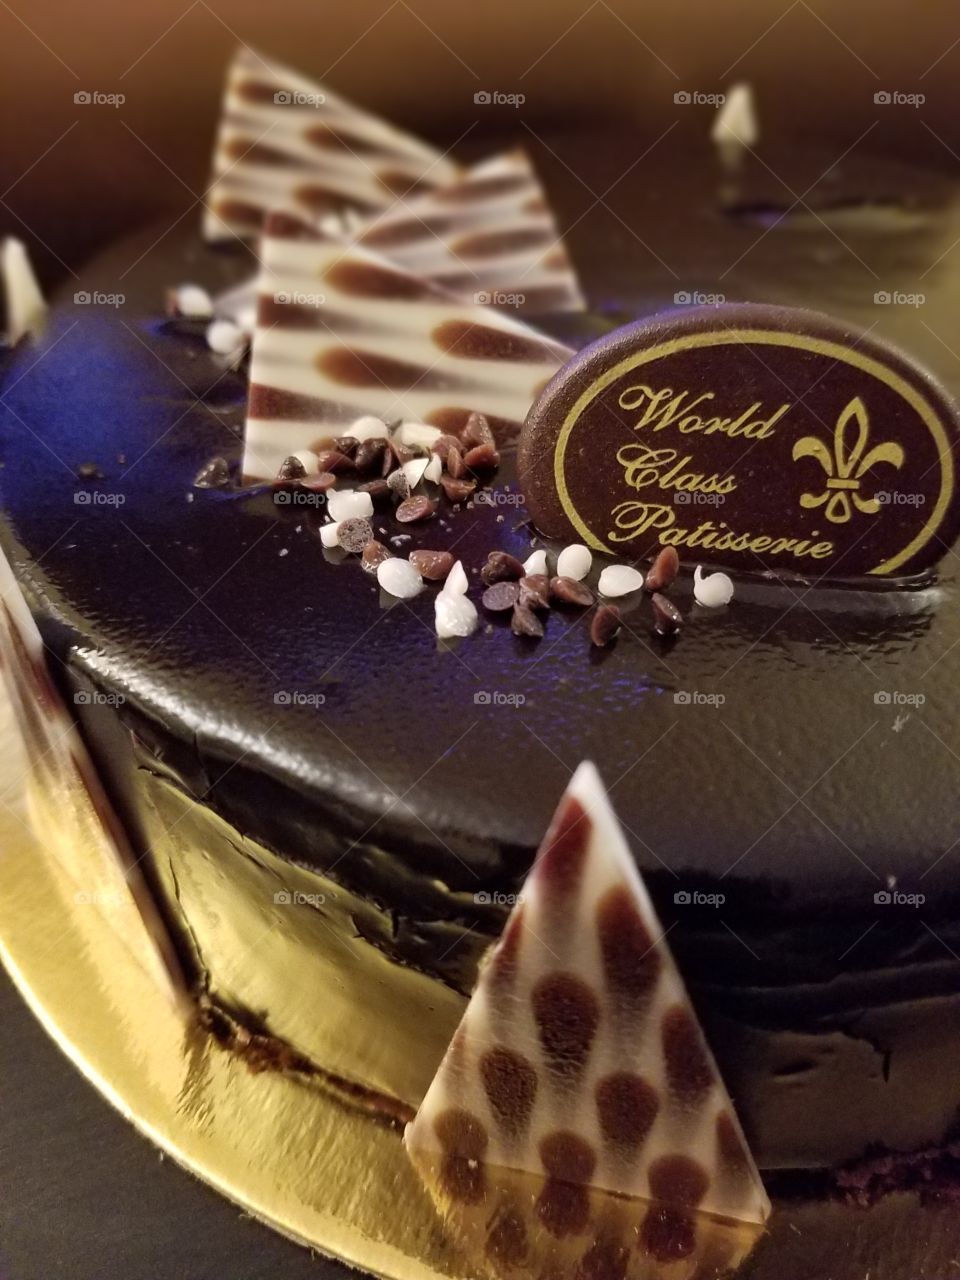 My hubby and daughter surprised me with a world class cake on my birthday. So grateful for their world class love and affection.